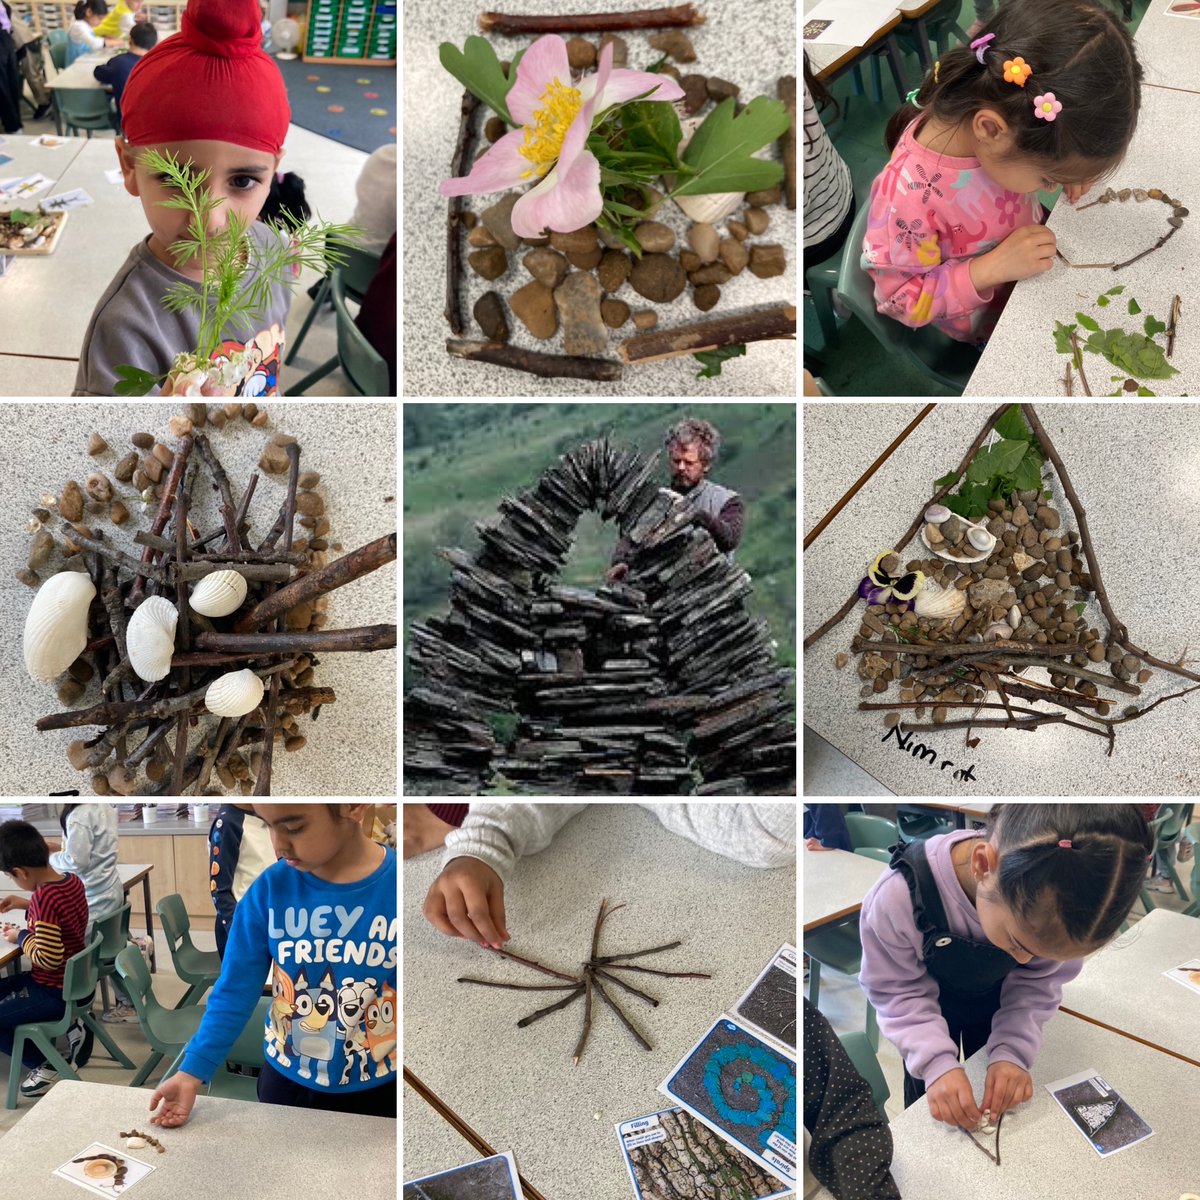 Inspired by the work of Andy Goldsworthy (@GoldsworthyAndy), Year 1 created nature sculptures from material found outdoors.  UNCRC Article 29: I have the right to an education which develops my personality, talents and abilities. #Year1 #art